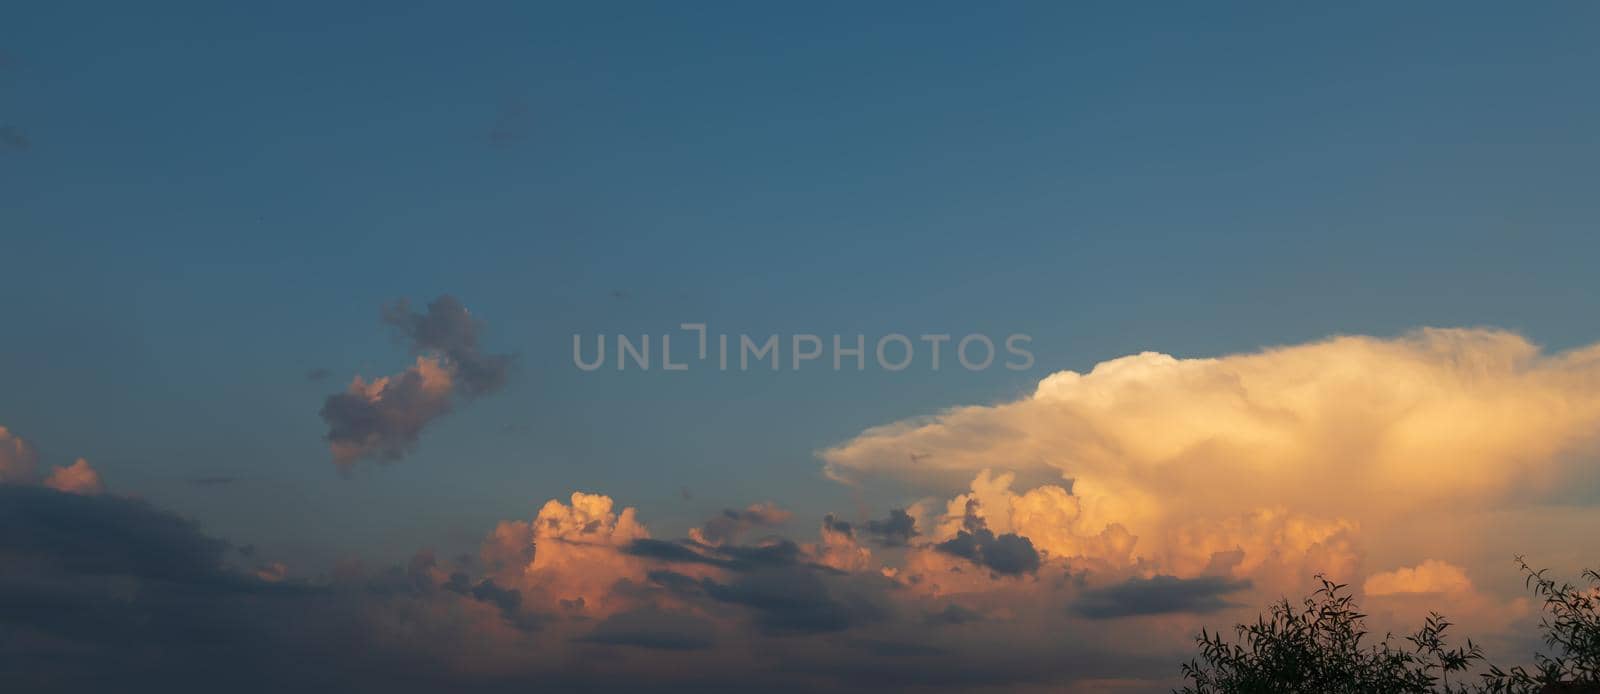 Sunset and clouds background. Sunset sky with fluffy clouds. Dramatic light at sunset